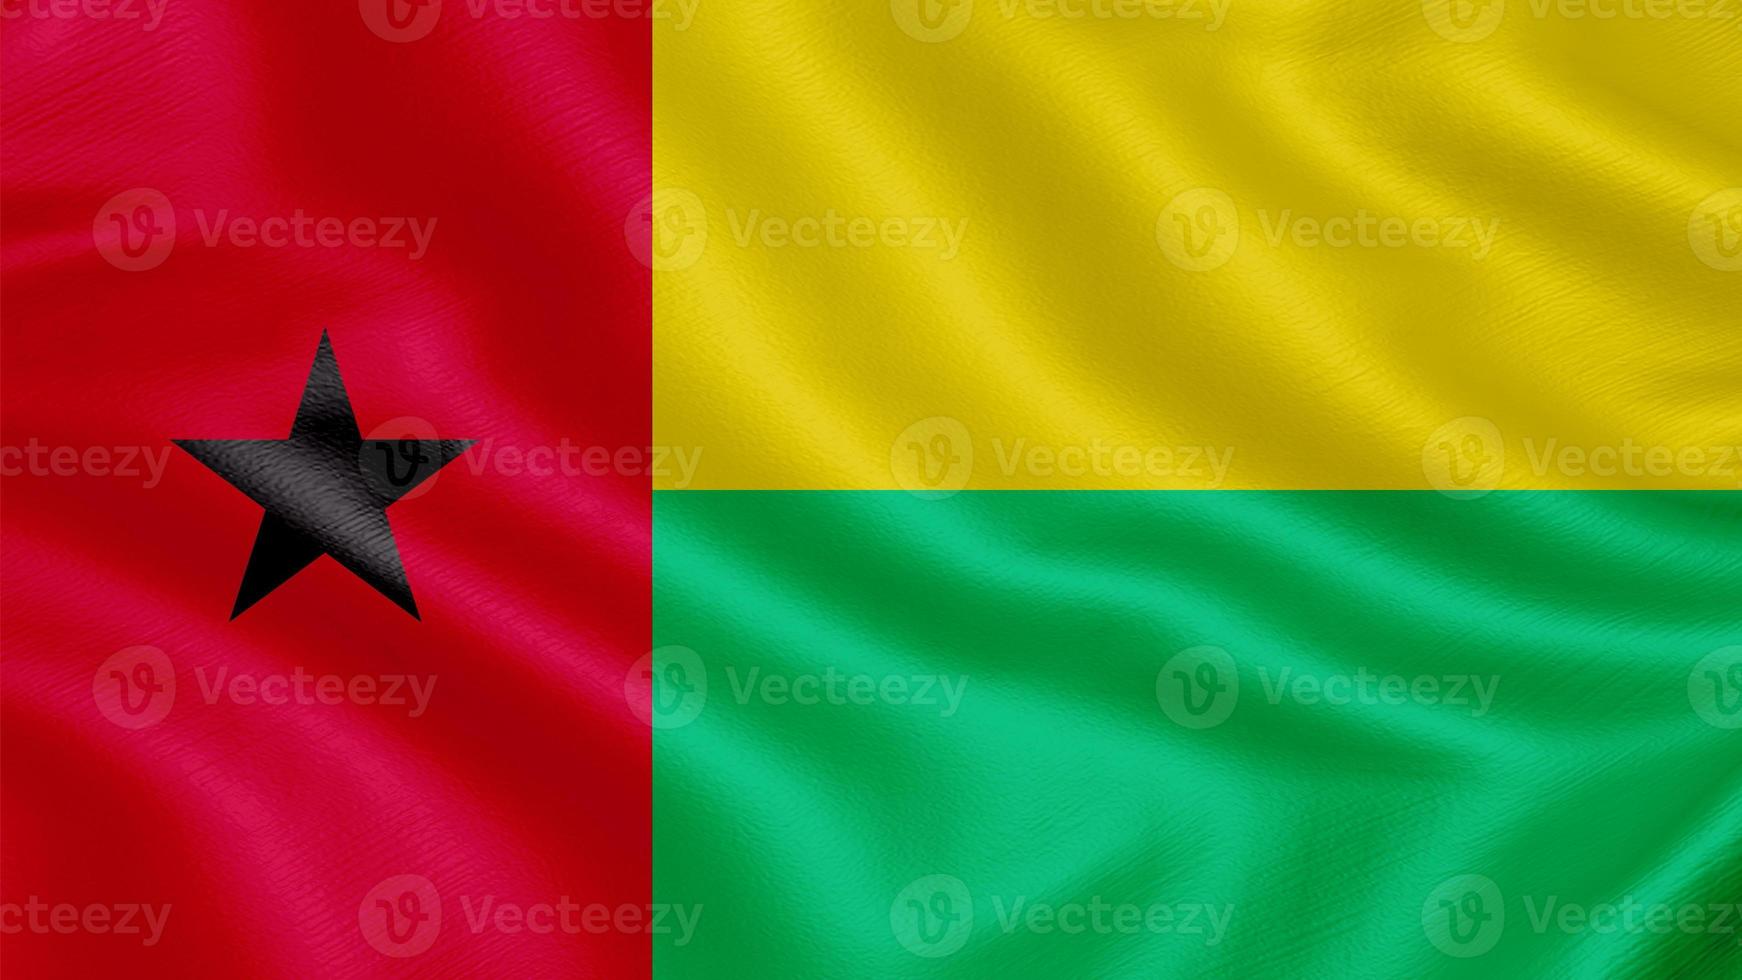 Flag of Guinea Bissau. Realistic Waving Flag 3d Render Illustration with Highly Detailed Fabric Texture. photo